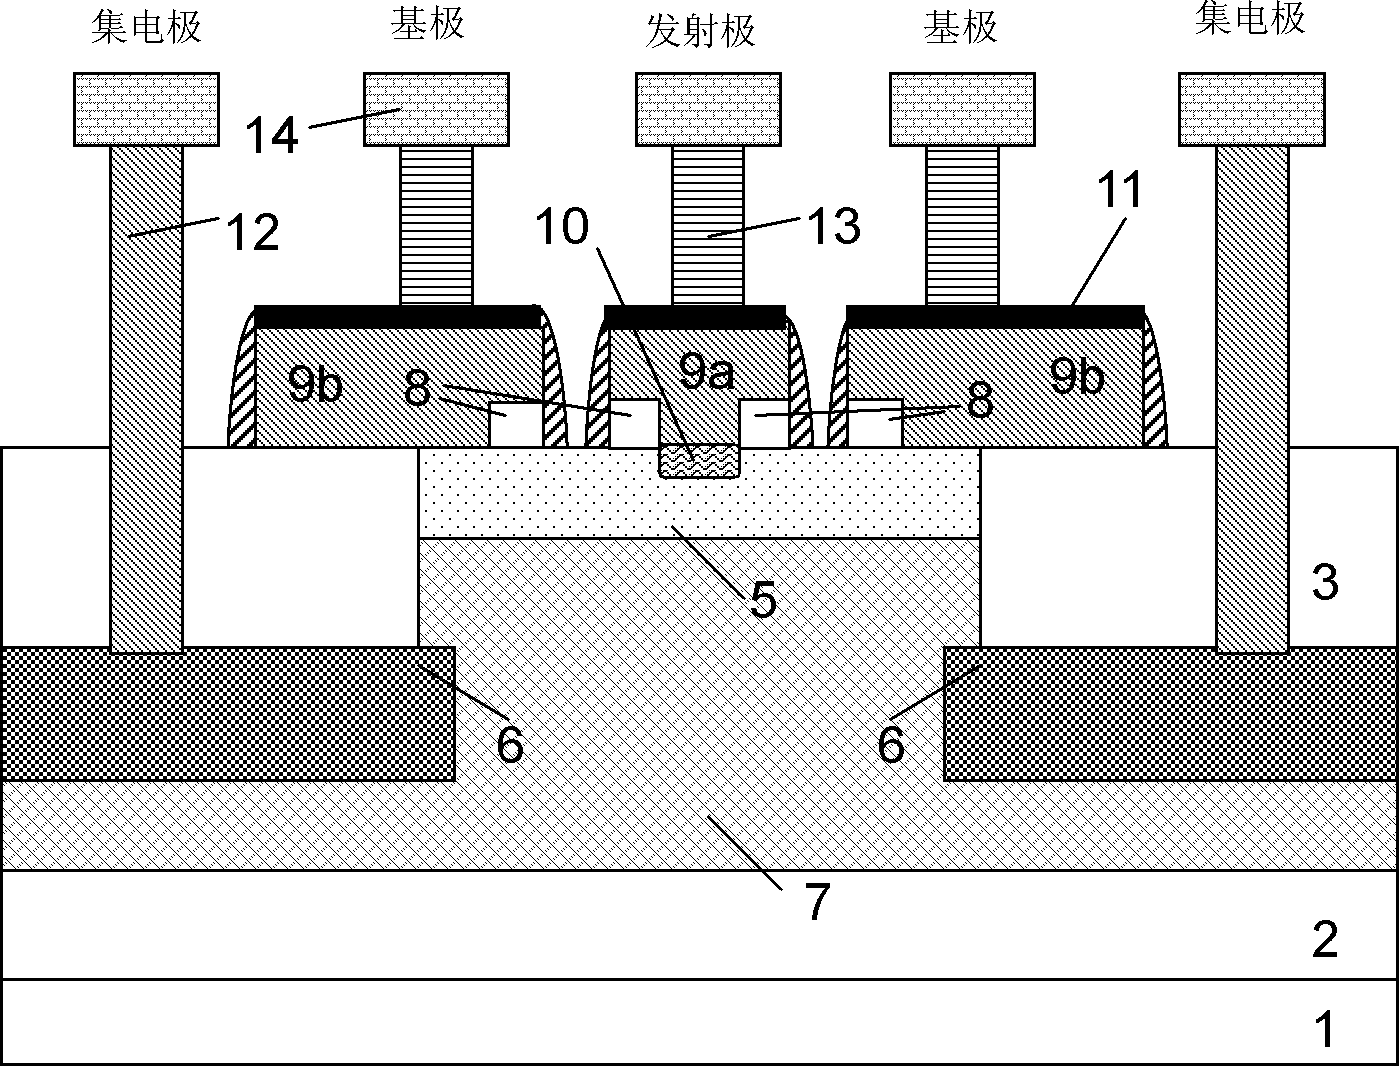 Vertical parasitic PNP device in BiCMOS (Bipolar Complementary Metal-Oxide-Semiconductor) process and preparation method thereof